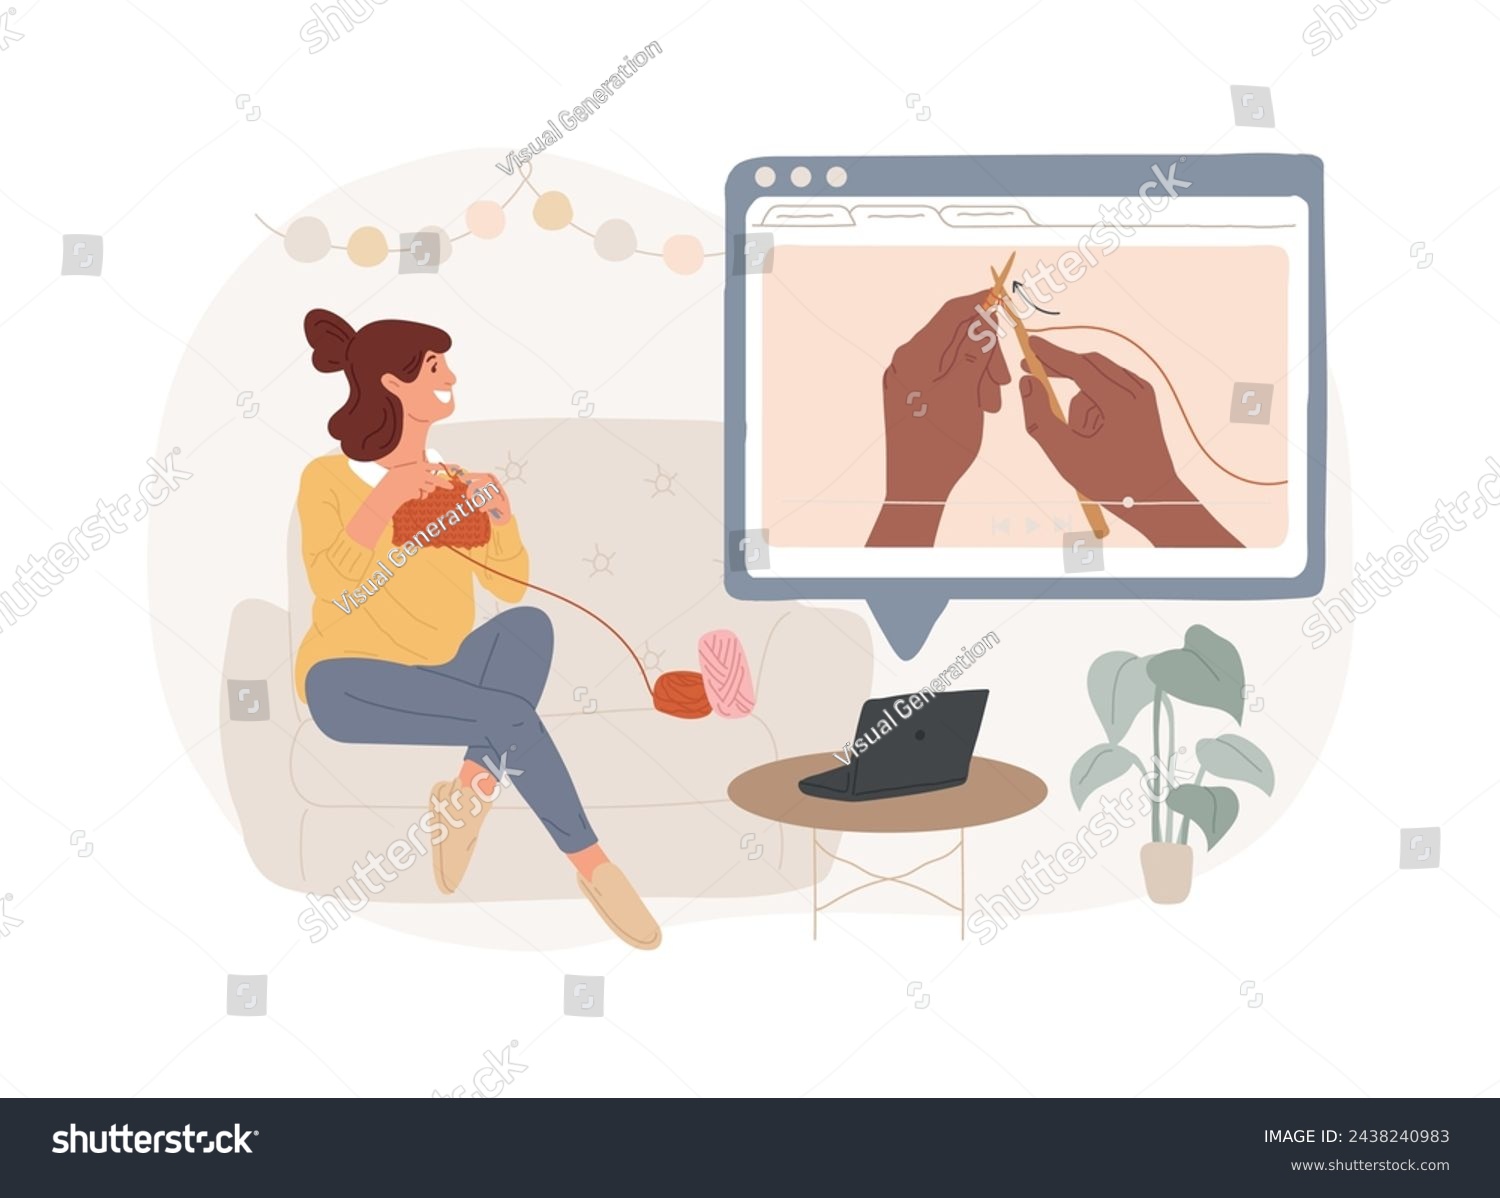 SVG of Learn how to knit isolated concept vector illustration. Positive self-statement practice, crocheting mental health benefits, relieve stress during the coronavirus pandemic vector concept. svg